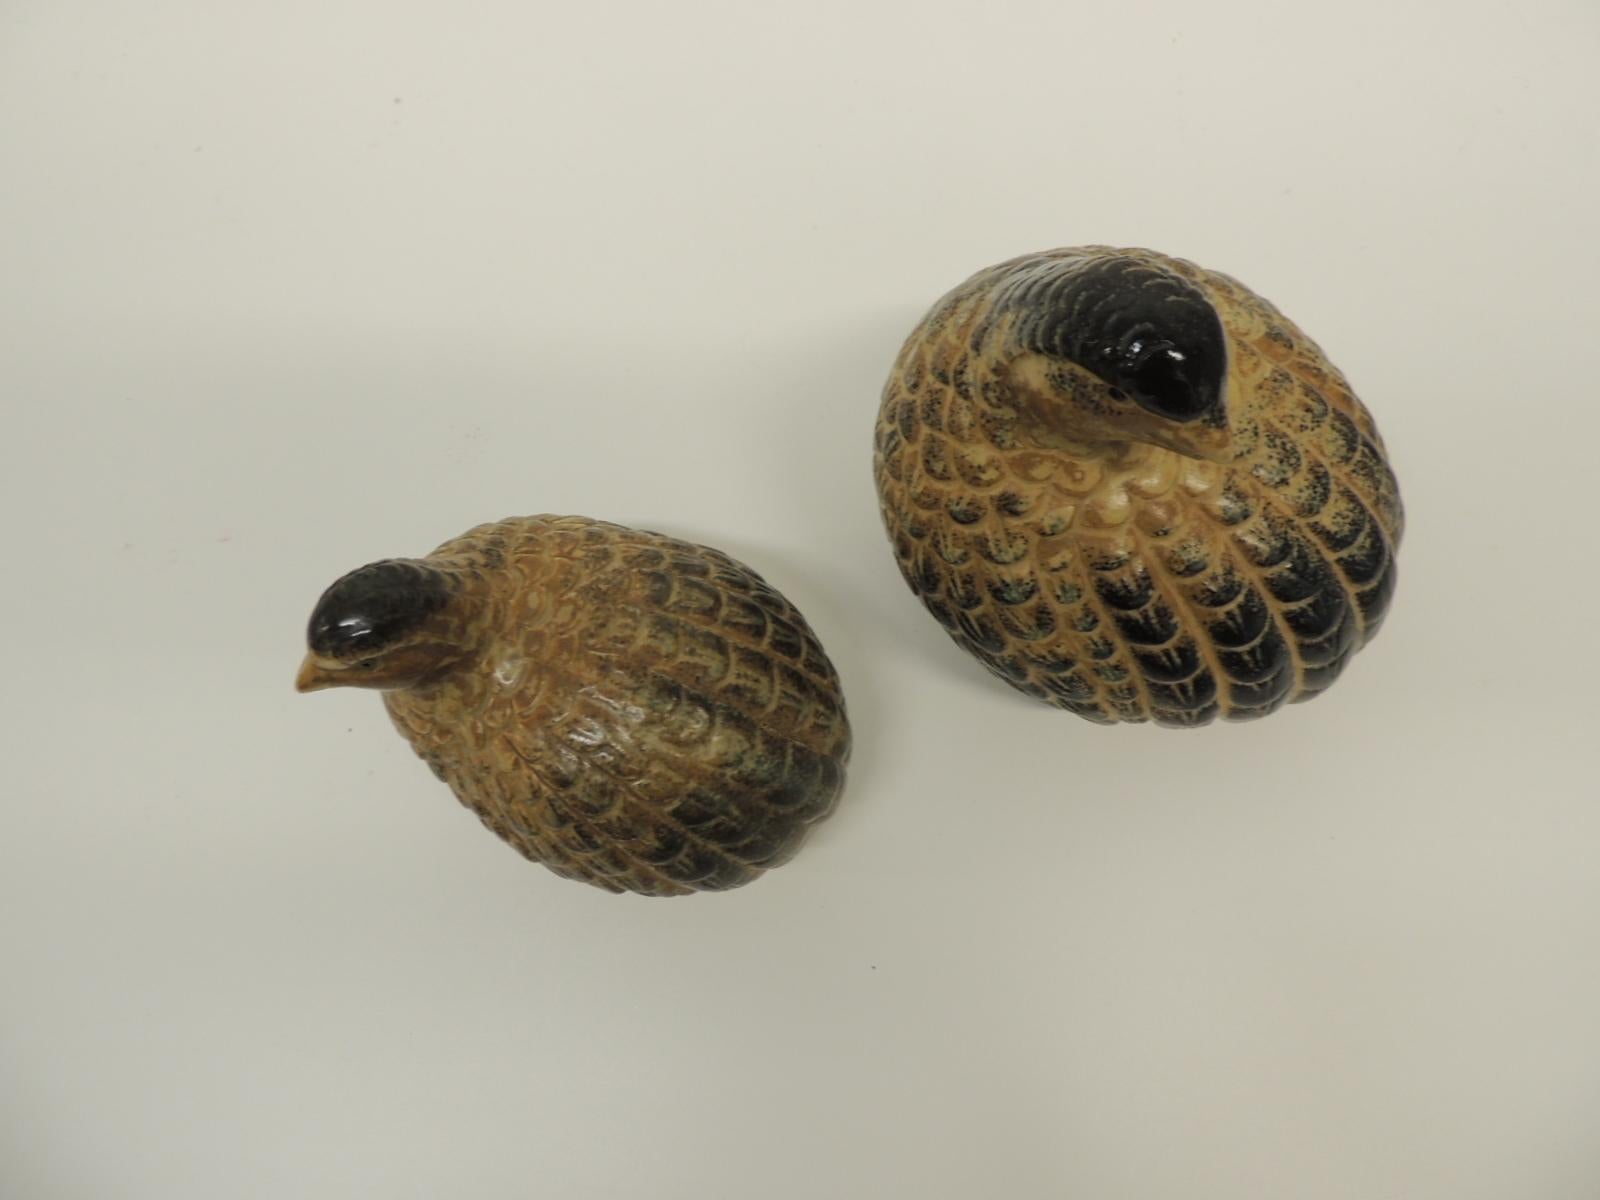 Pair of vintage hand painted porcelain Asian quails.
Medium and large size birds. Tan and light brown figurines.
Size: 6 x 4.5 x 5.5 and 3.5 x 5 x 3.5.